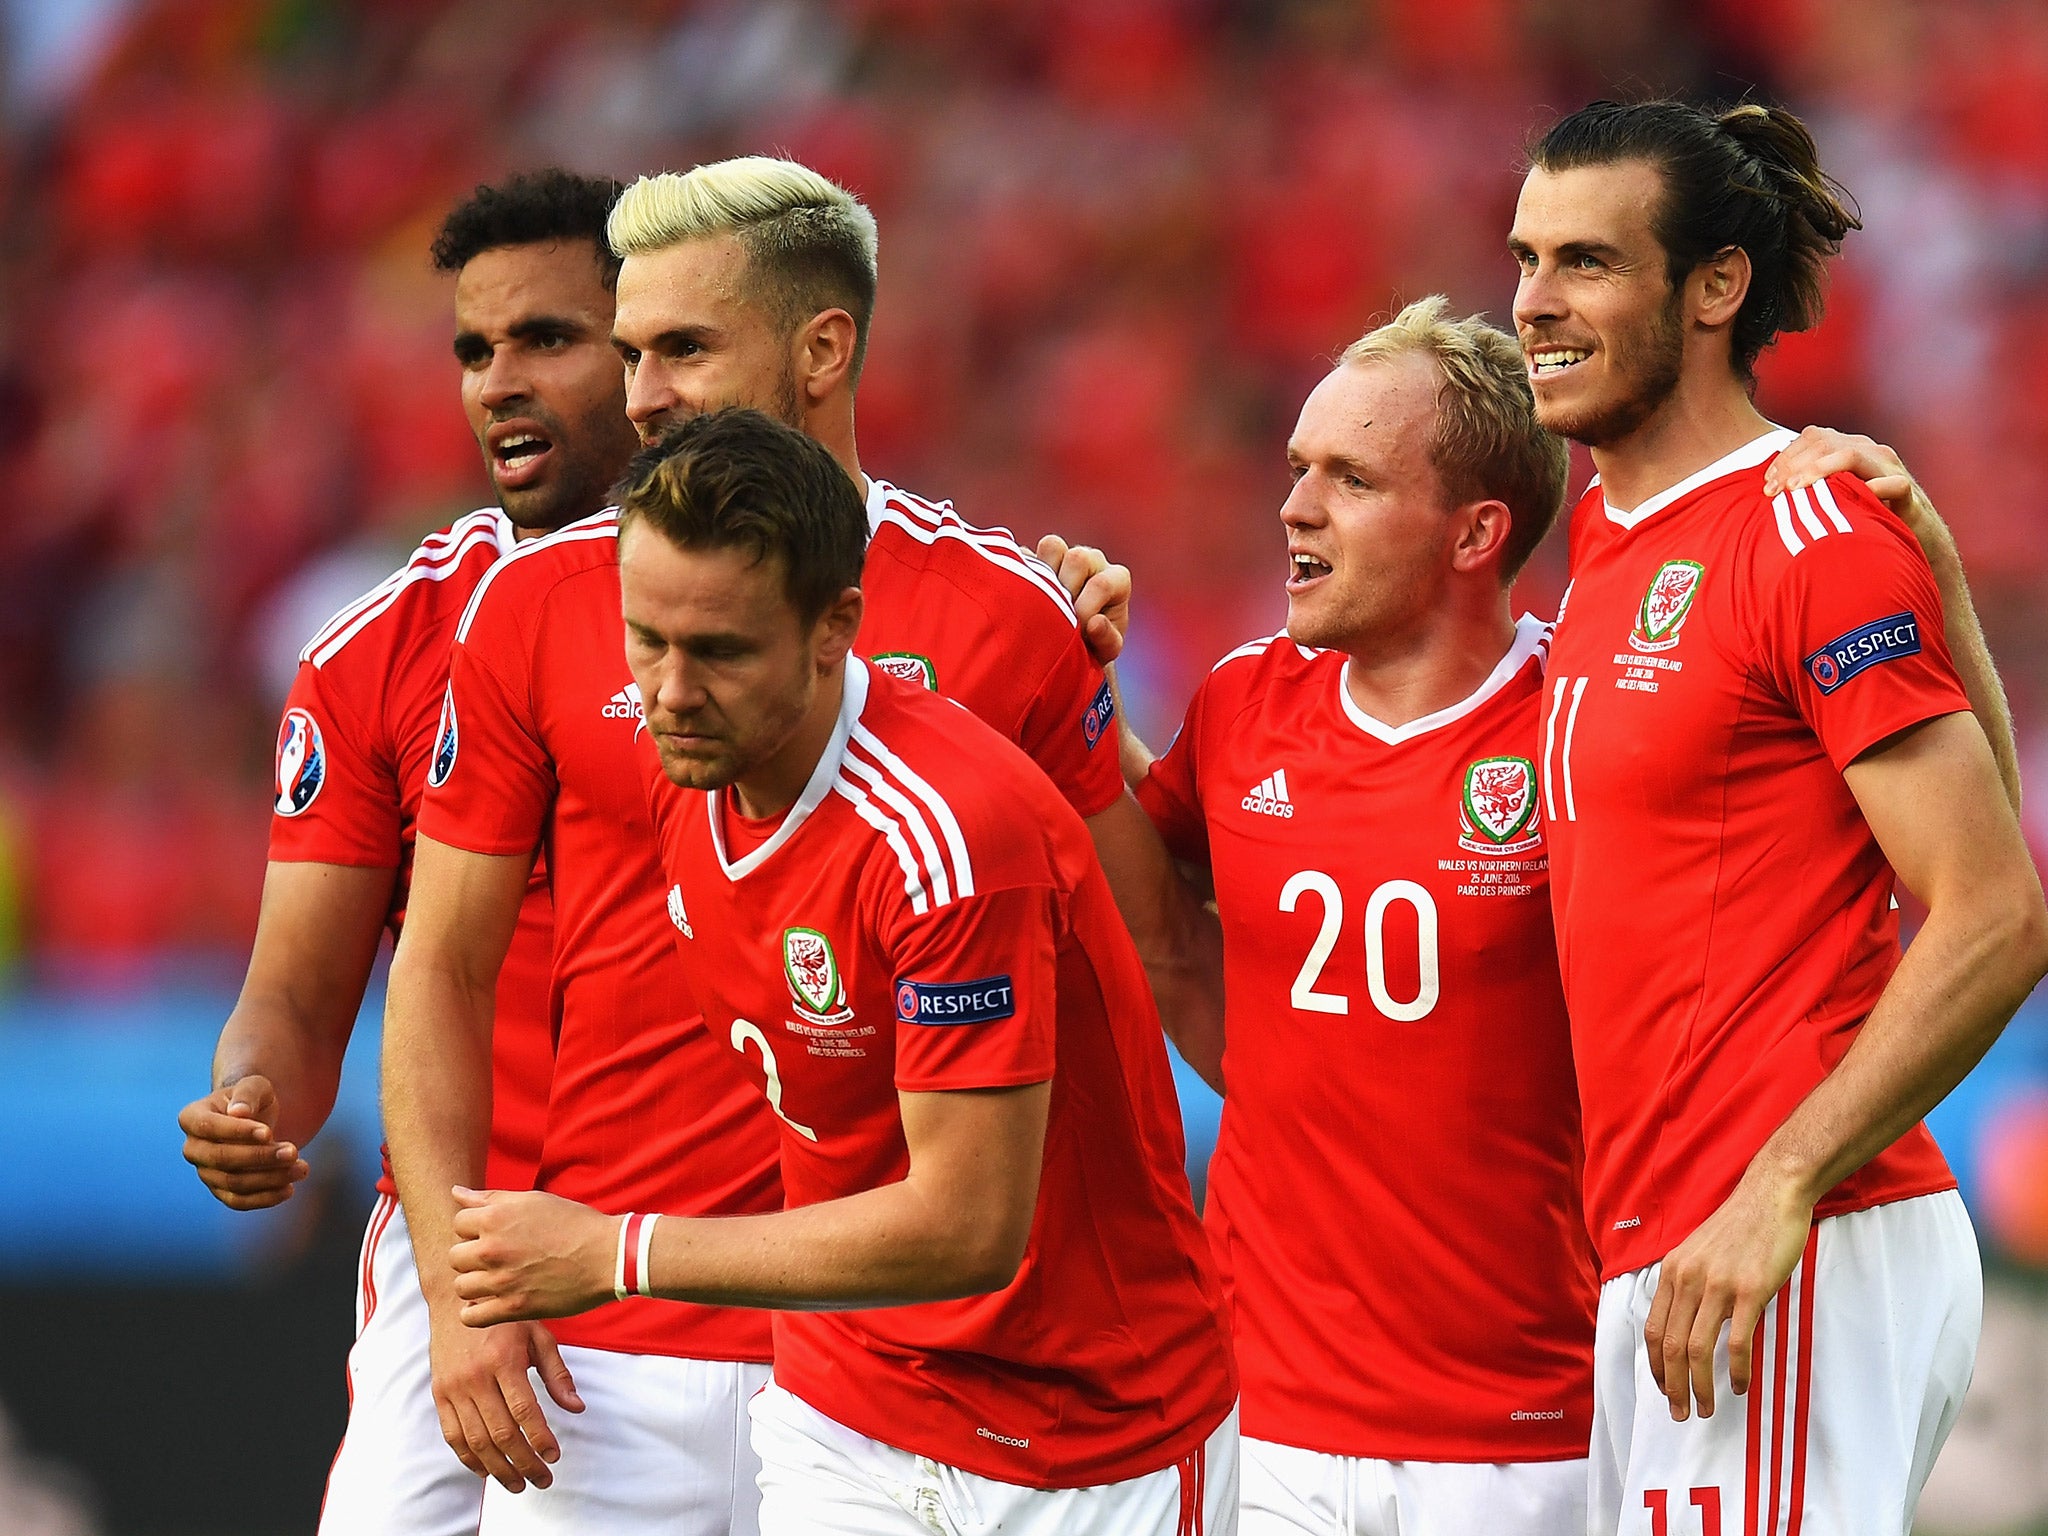 Wales firmly believe they can reach the Euro 2016 final and win it